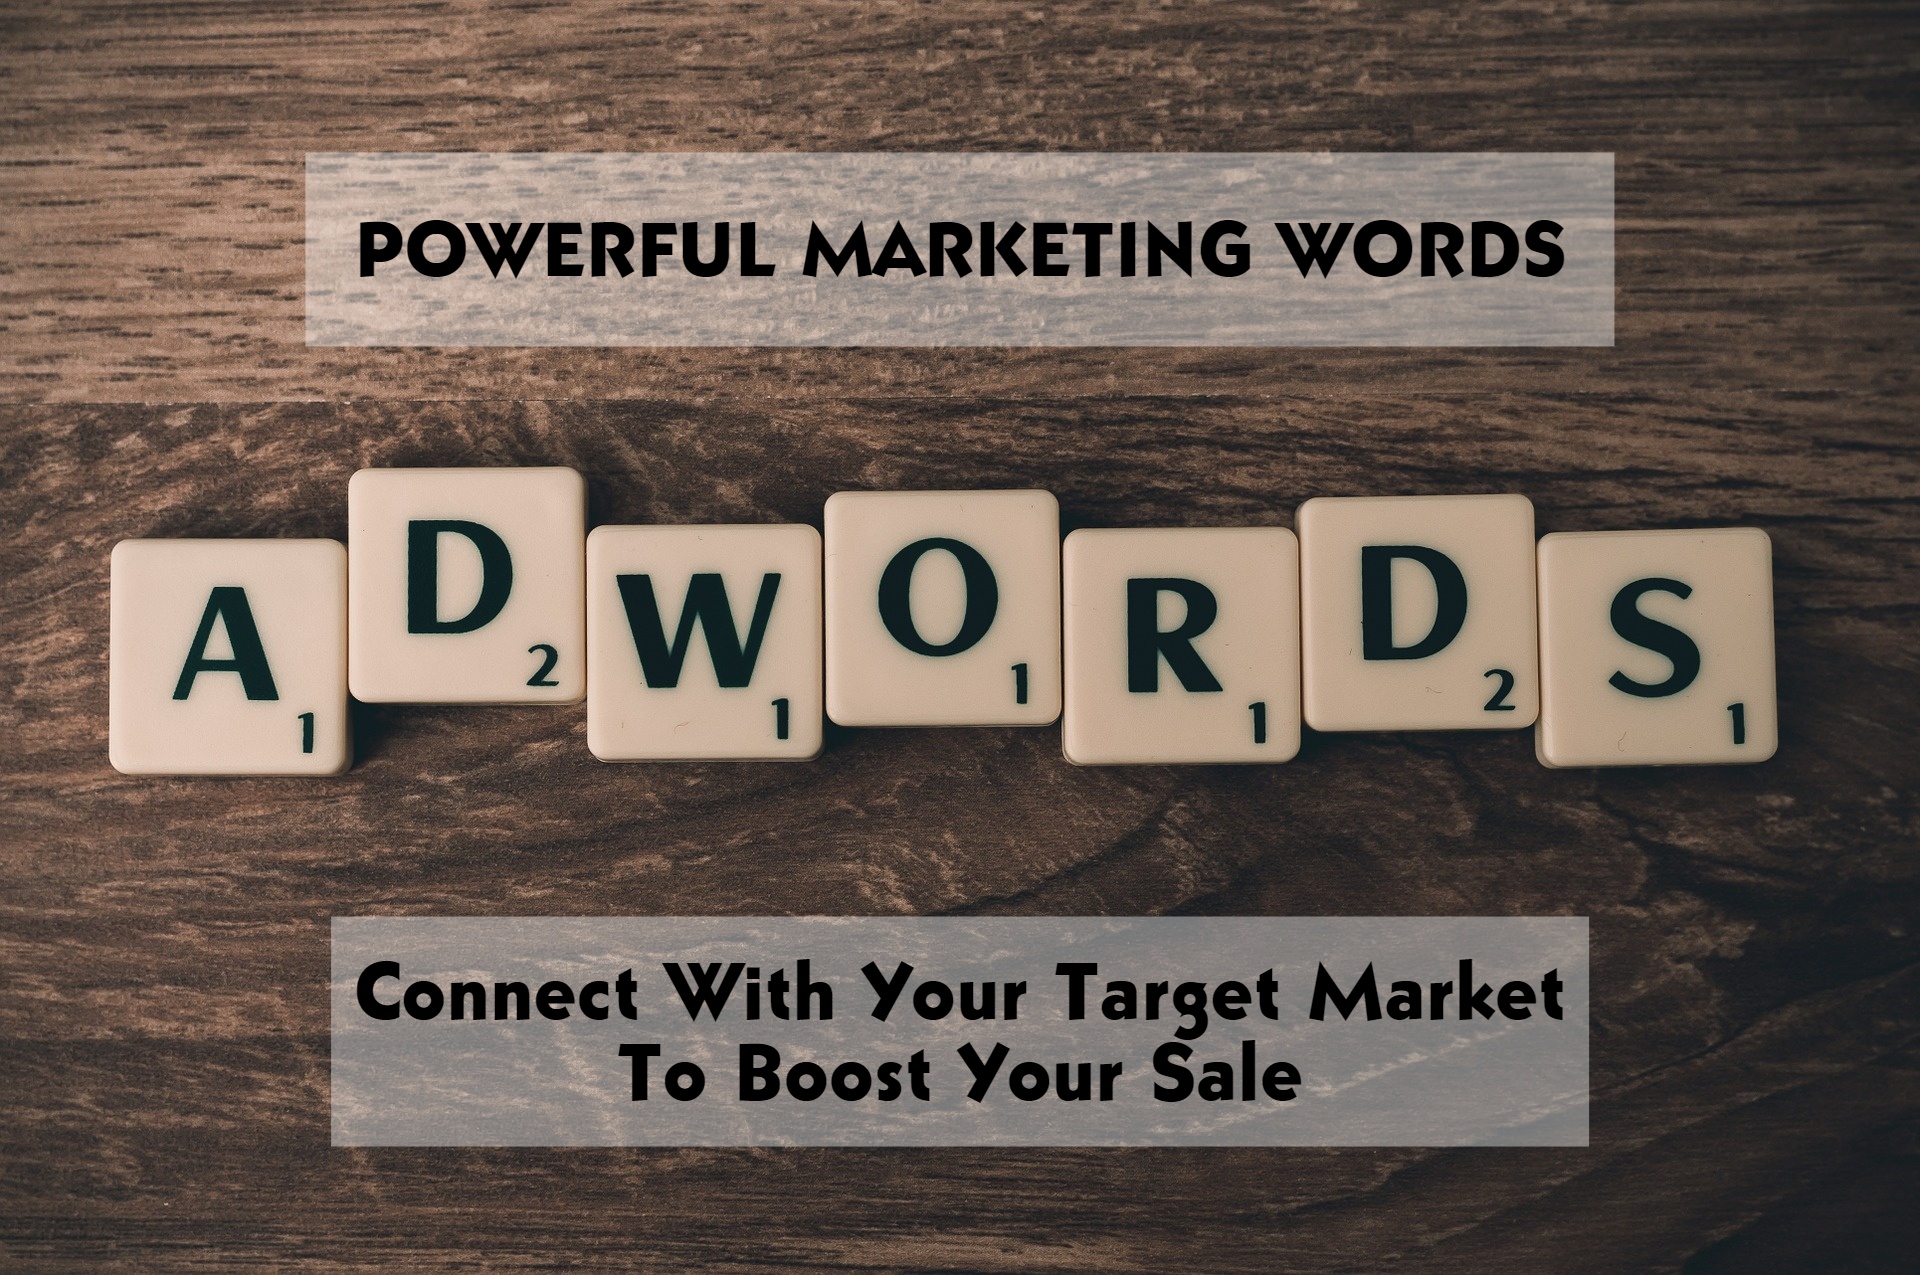 Powerful Marketing Words - Connect With Your Target Market To Boost Your Sale